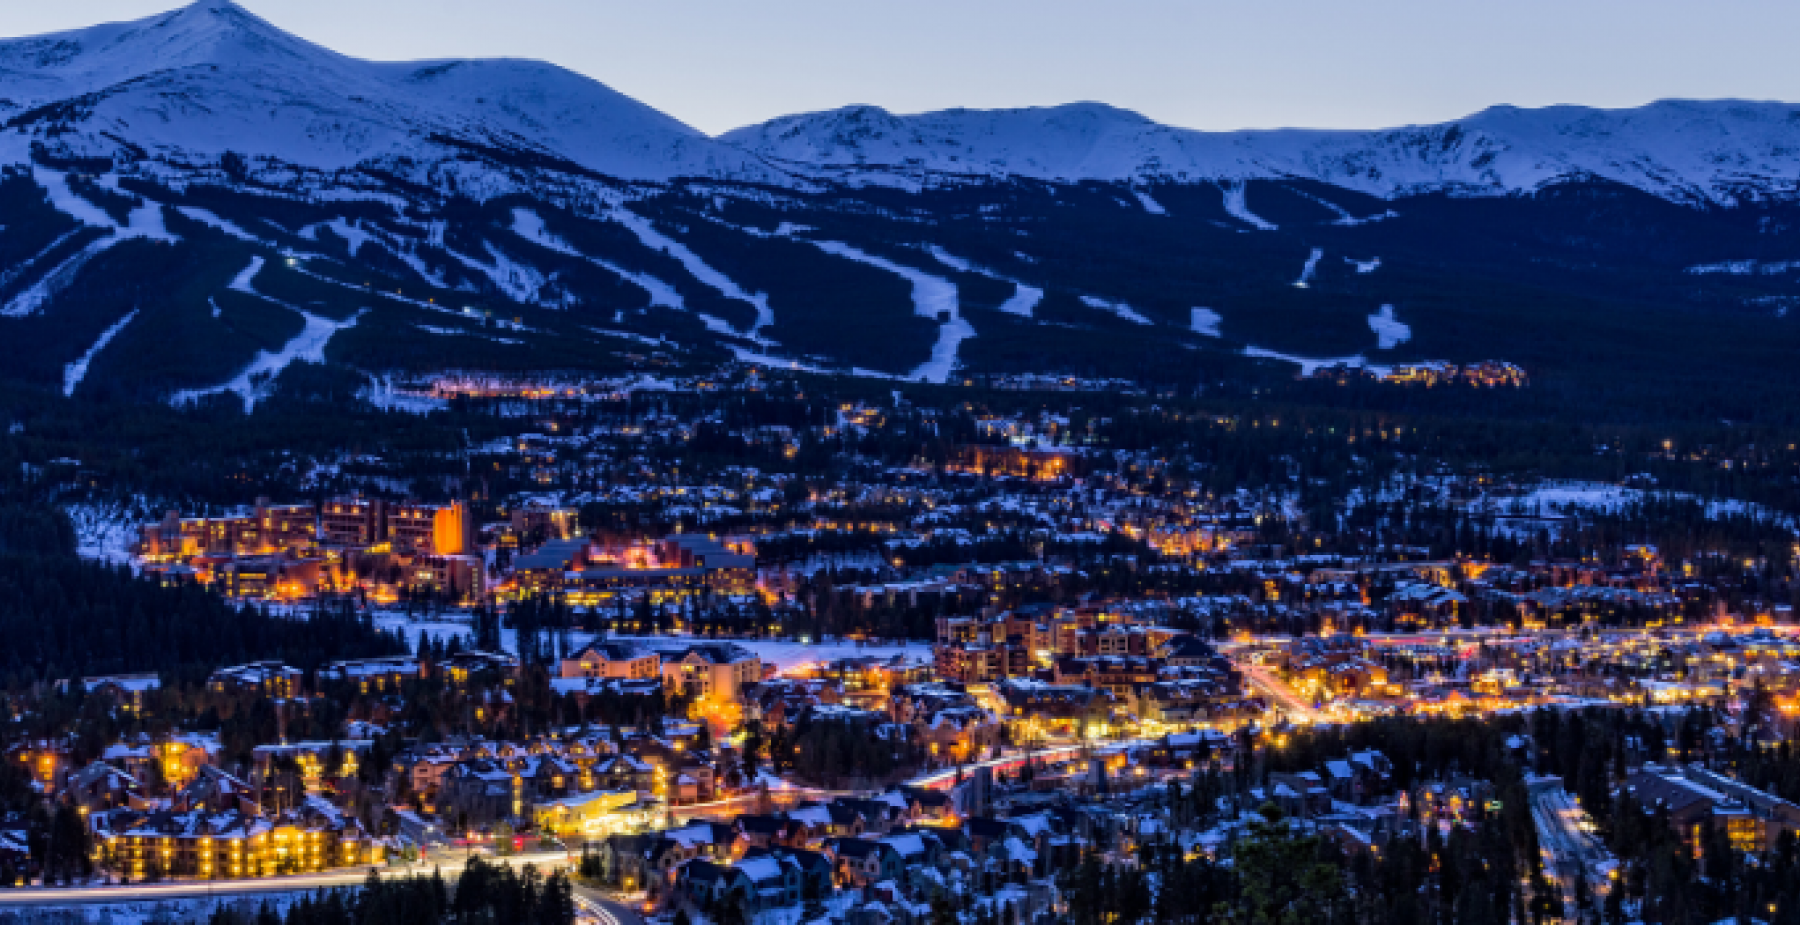 snowy Breckenridge downtown at night with mountain background